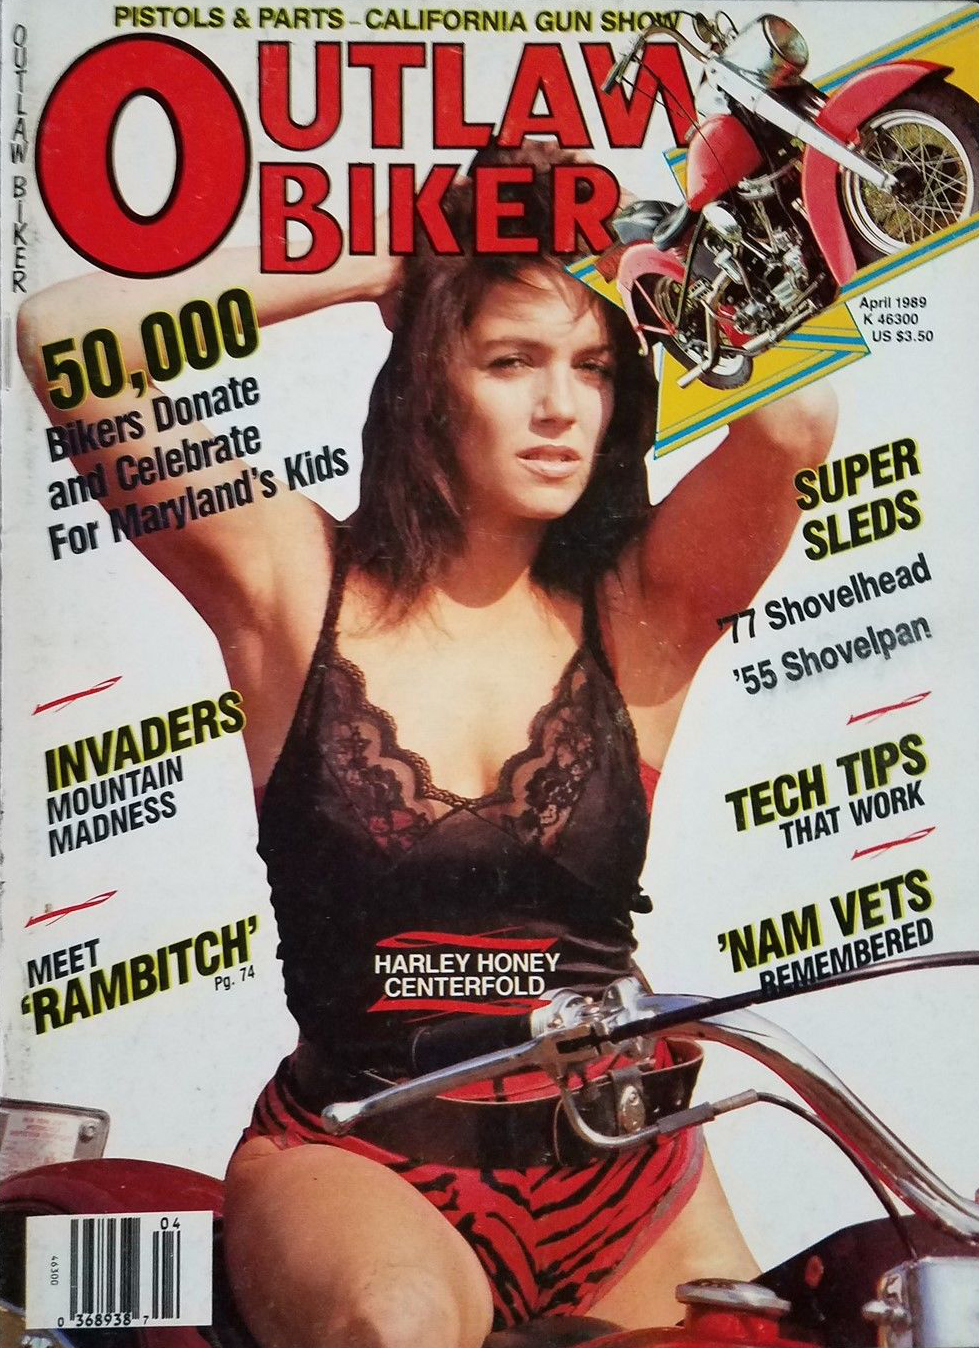 Outlaw Biker April 1989 magazine back issue Outlaw Biker magizine back copy Outlaw Biker April 1989 Magazine Back Issue for Bike Riding Rebels and Members of Outlaw Motorcycle Clubs. 50,000 Bikers Donate And Celebrate For Maryland's Kids.